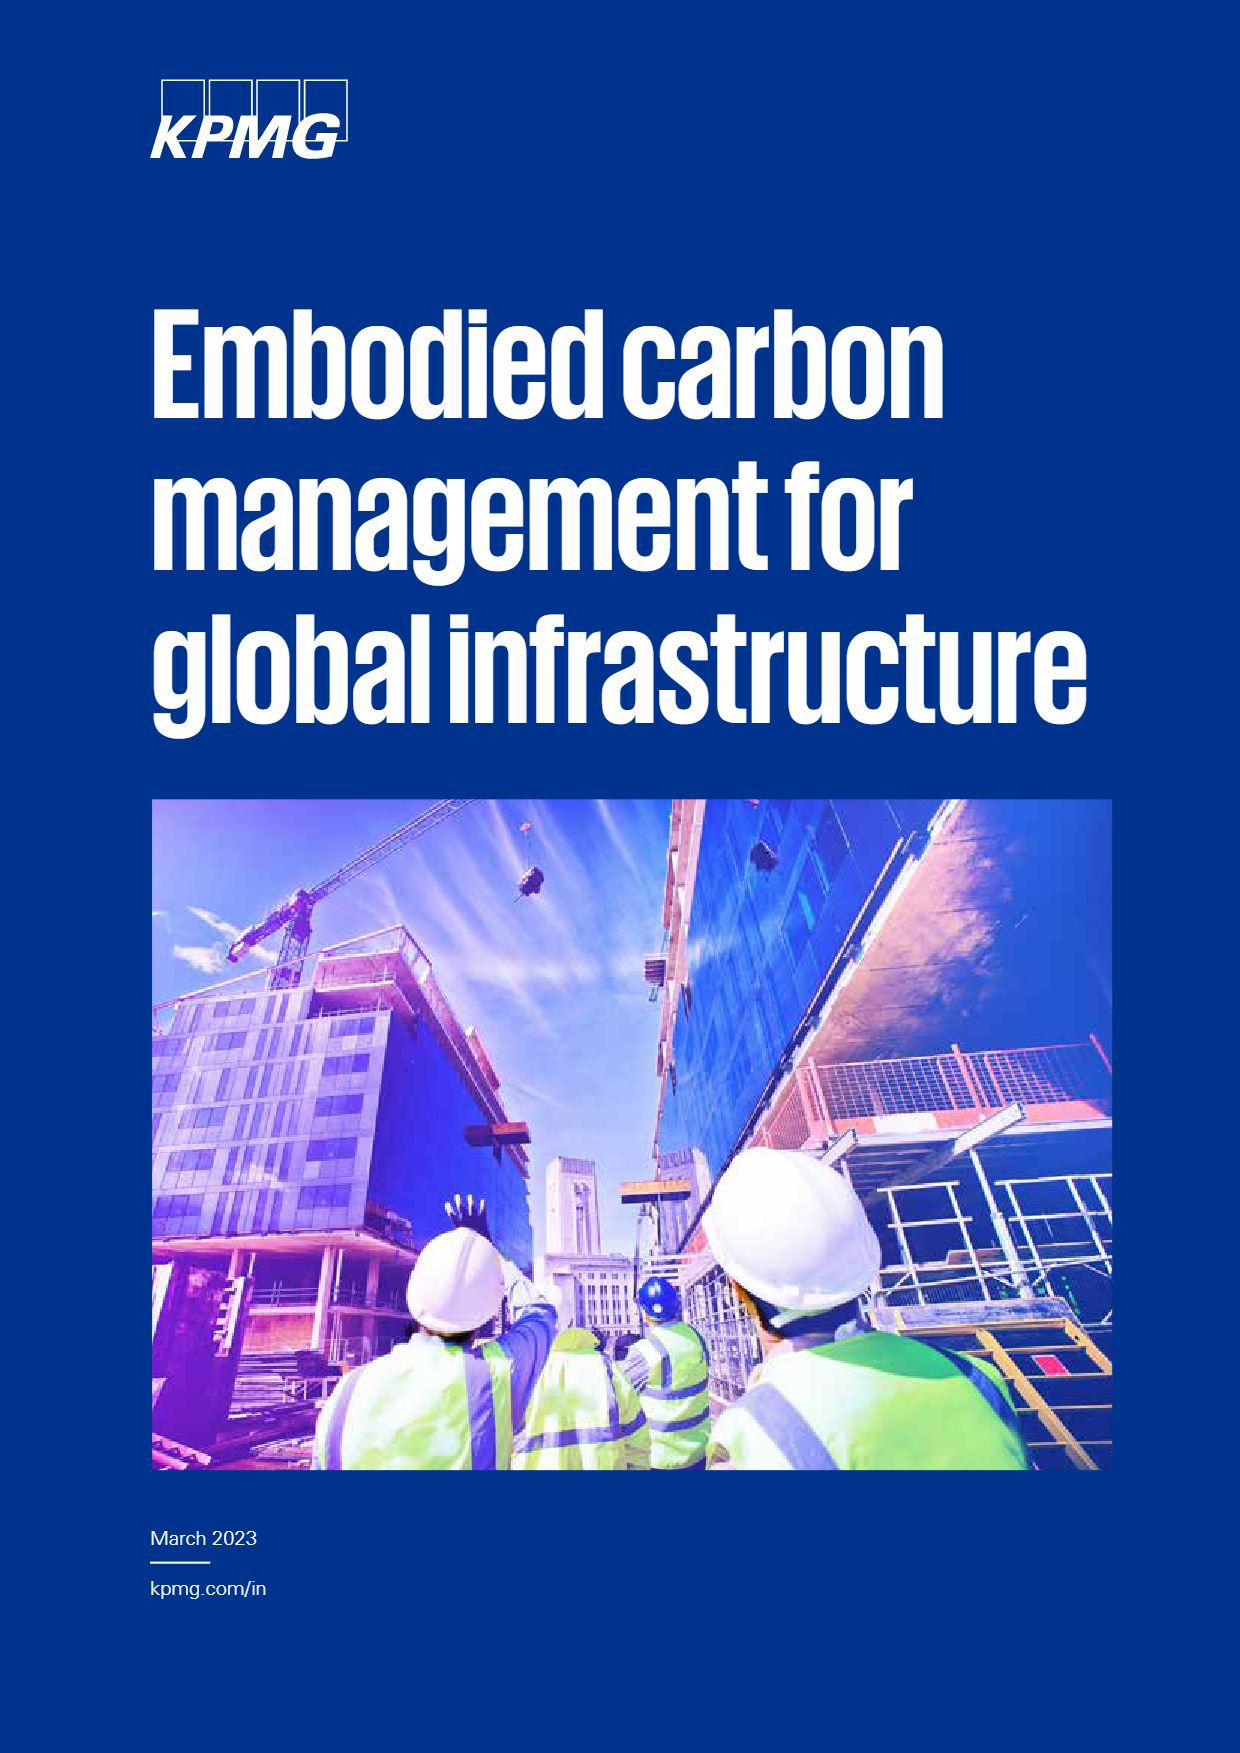 Embodied carbon management for global infrastructure